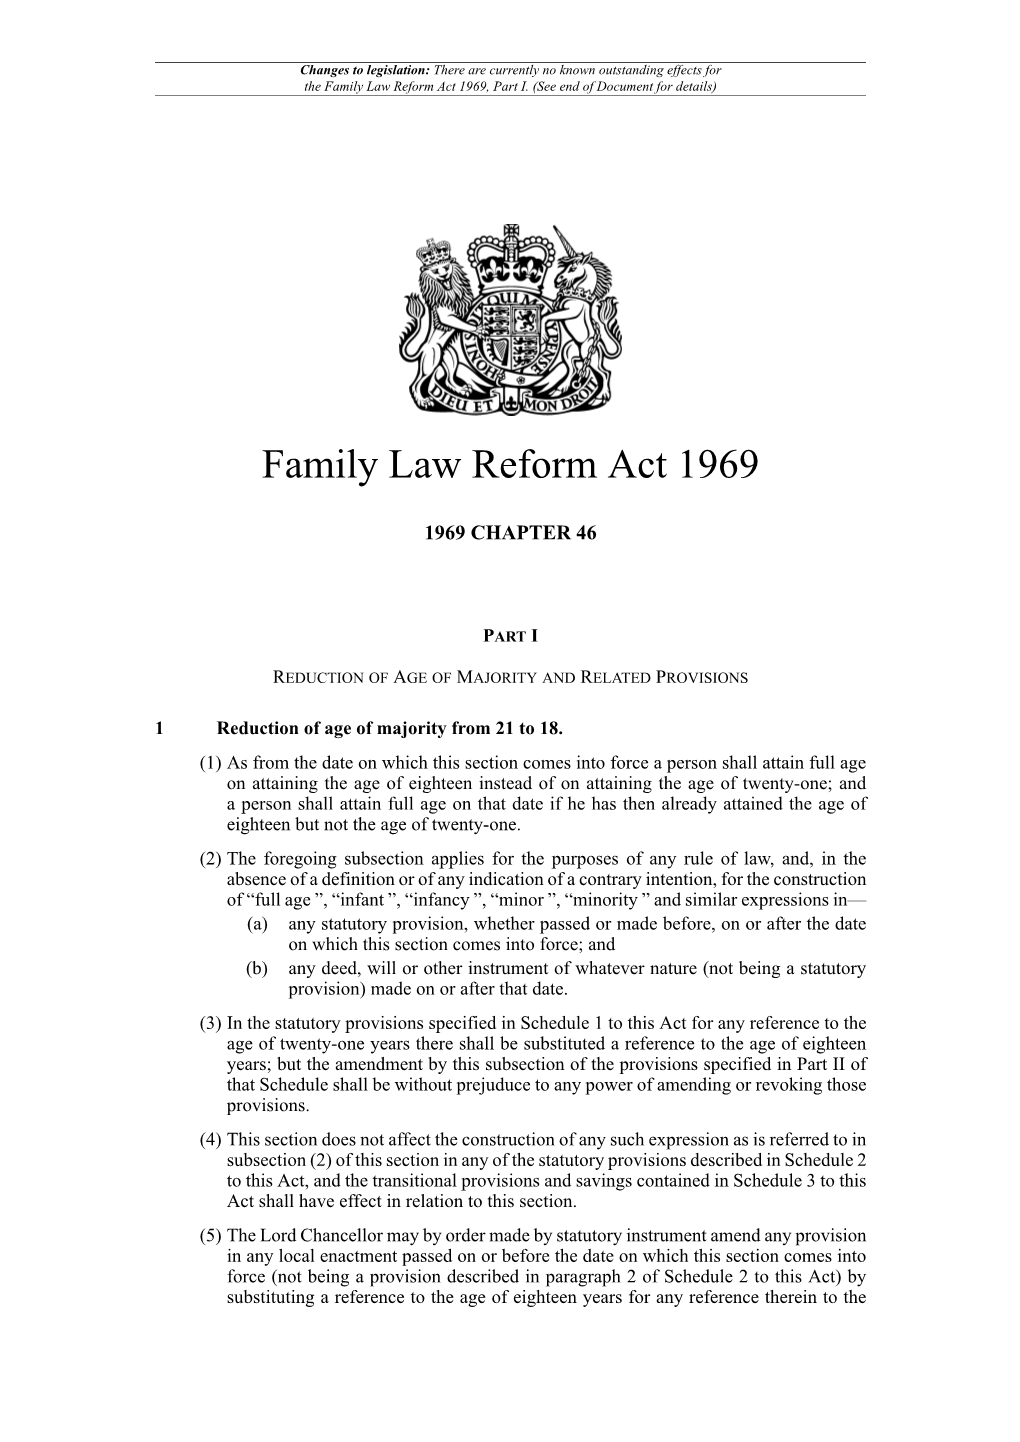 Family Law Reform Act 1969, Part I